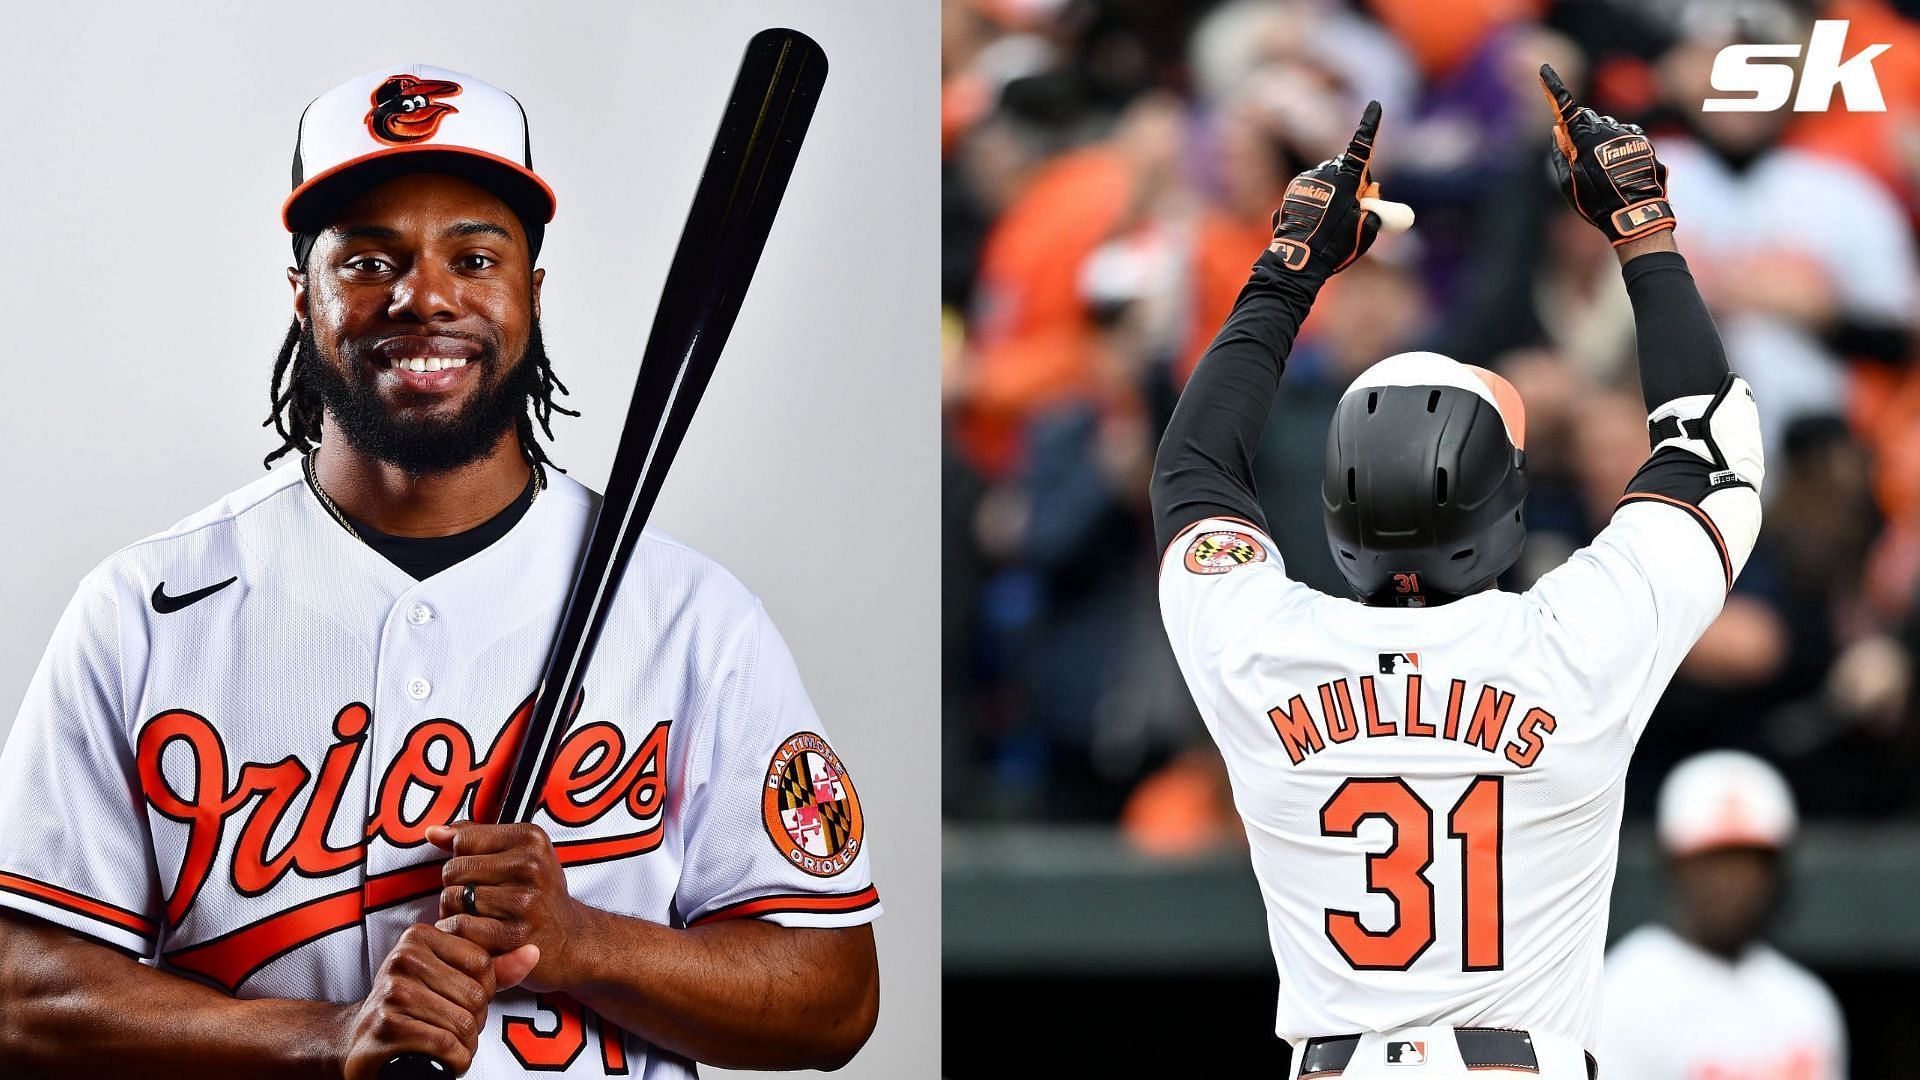 Baltimore Orioles outfielder Cedric Mullins crushes walk-off home run to defeat Twins